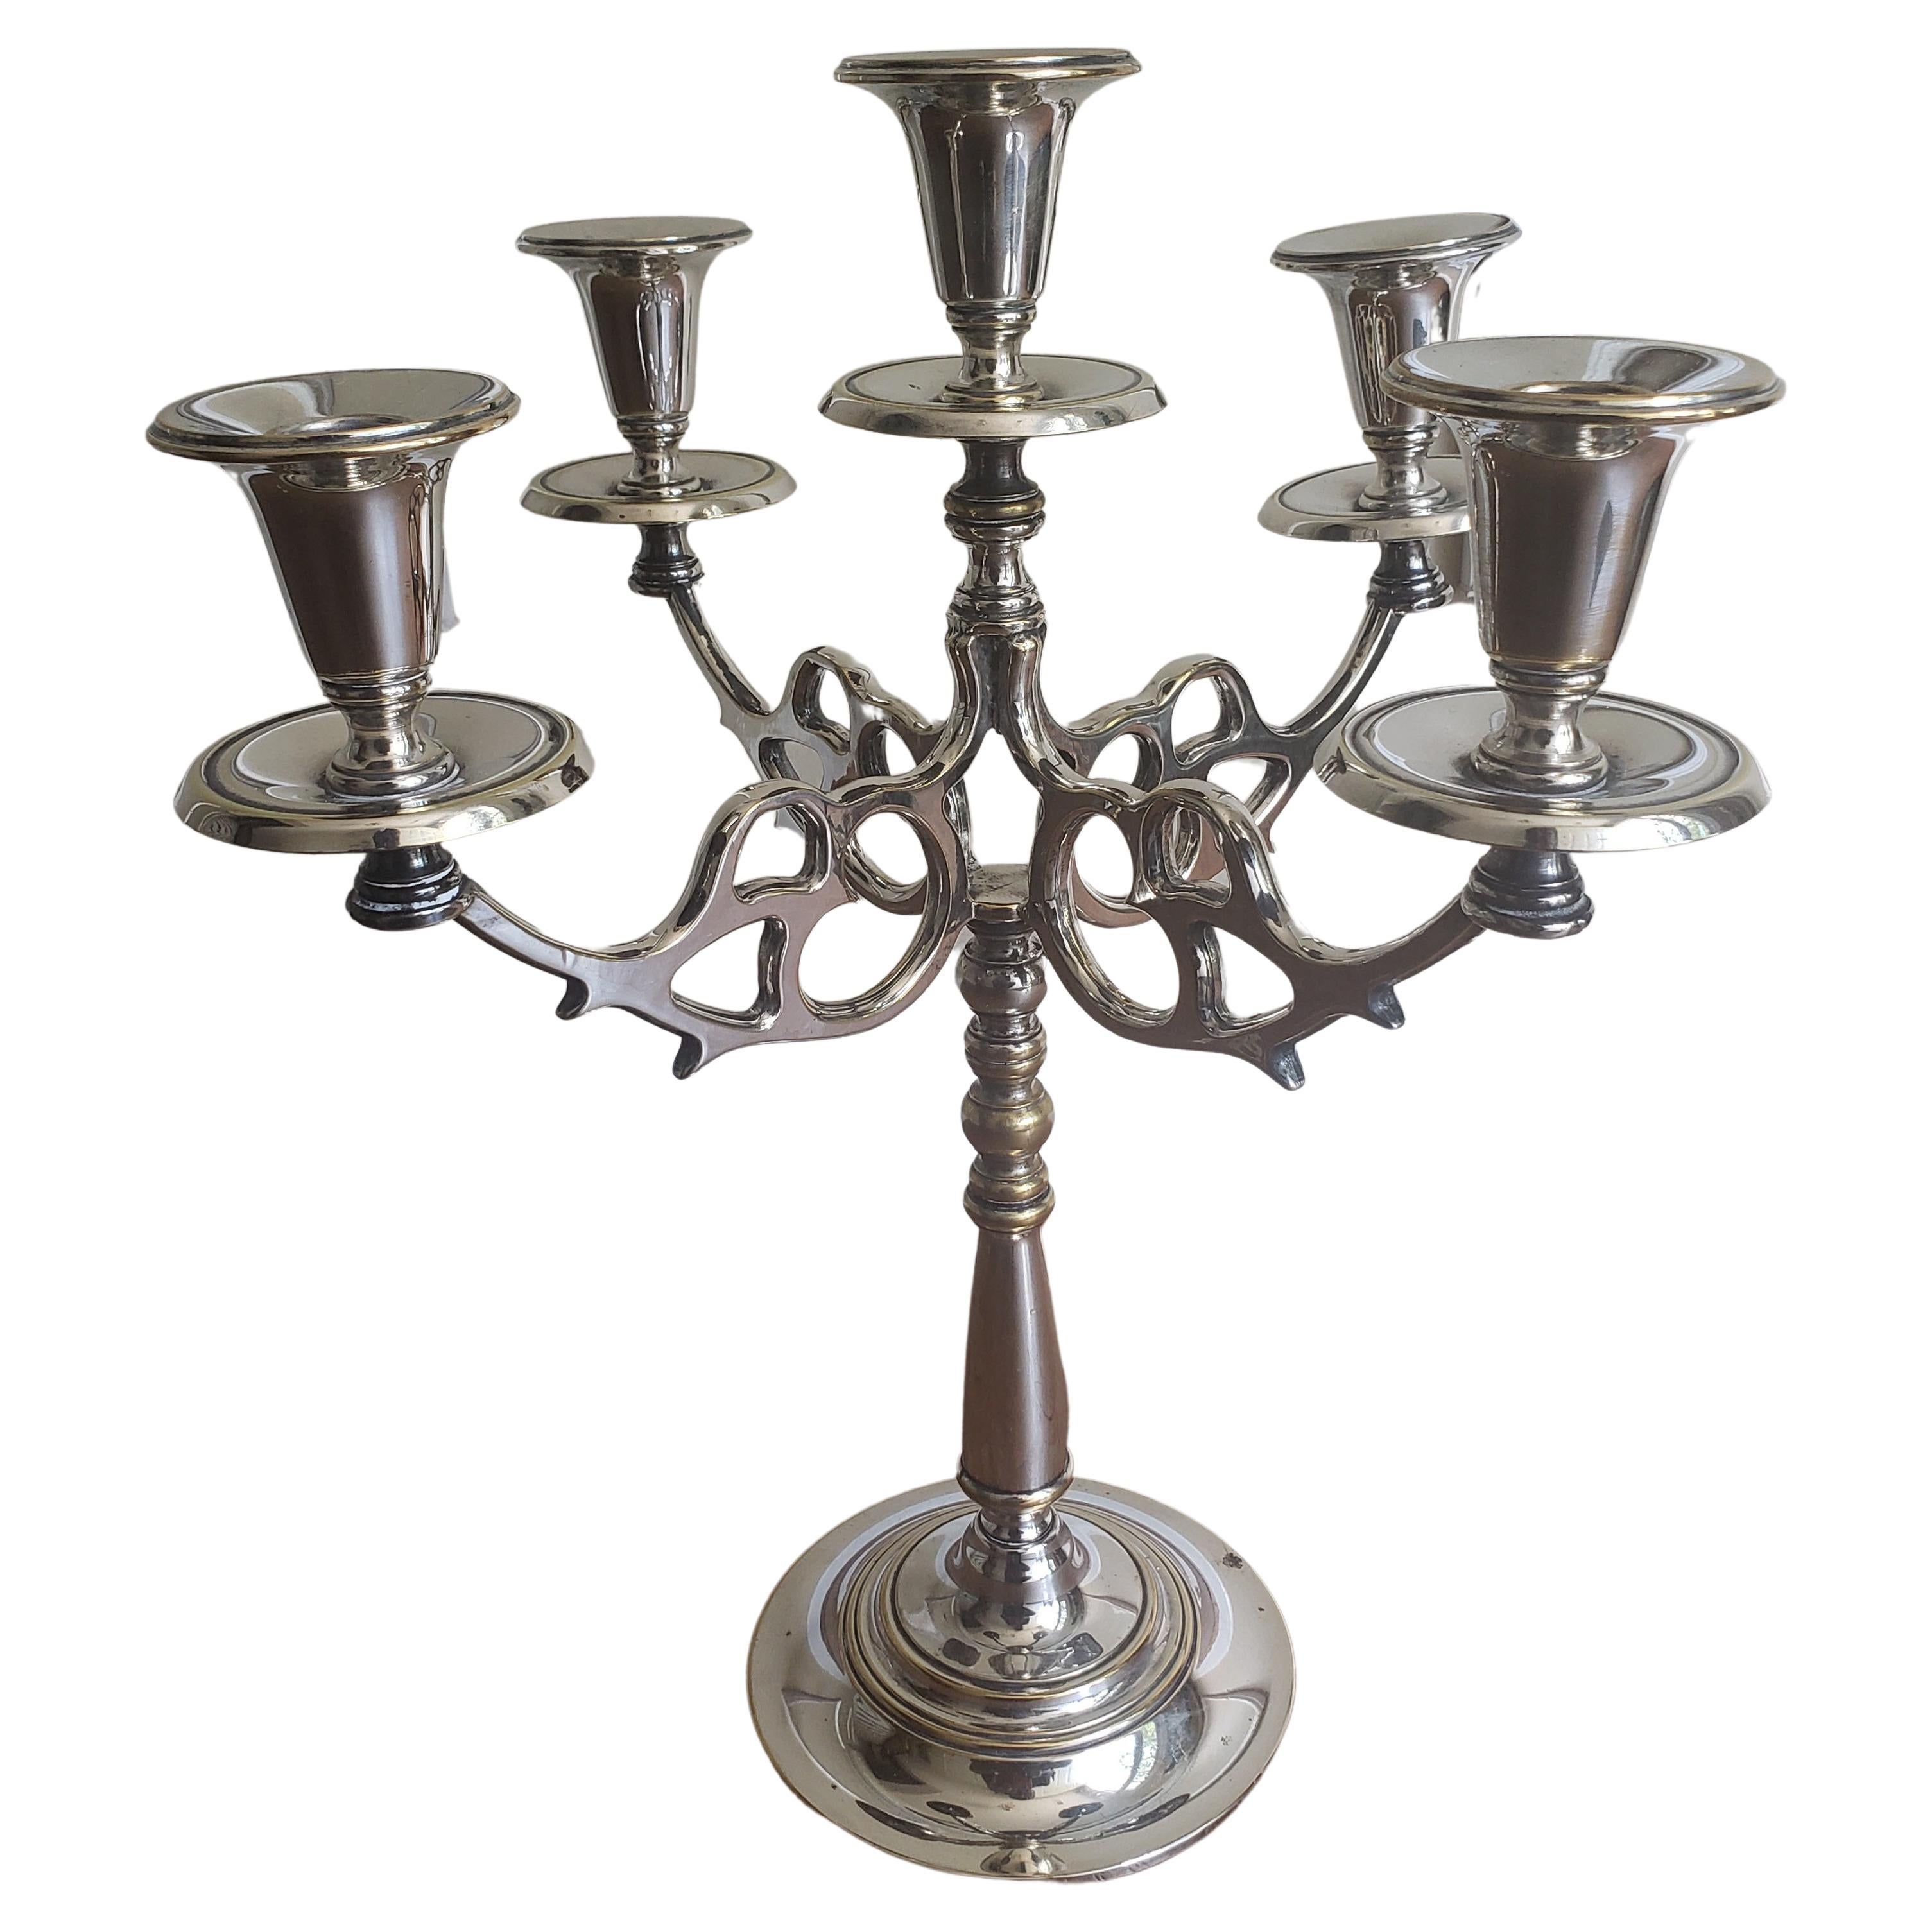 D. W. Haber and Son Silver Plated  Art Nouveau Silver Plated 5 Arm Candelabrum